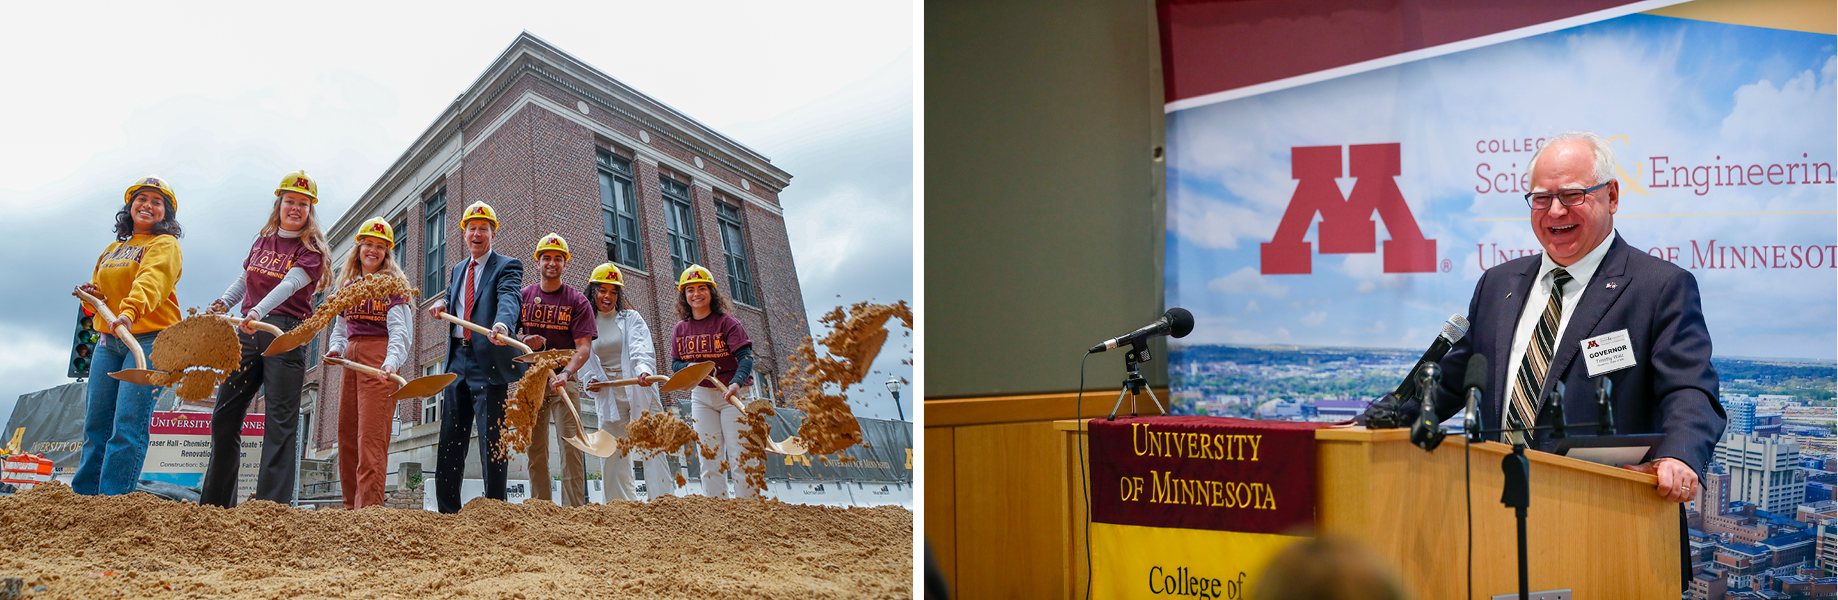 Two photographs from the Fraser hall renovation kickoff event